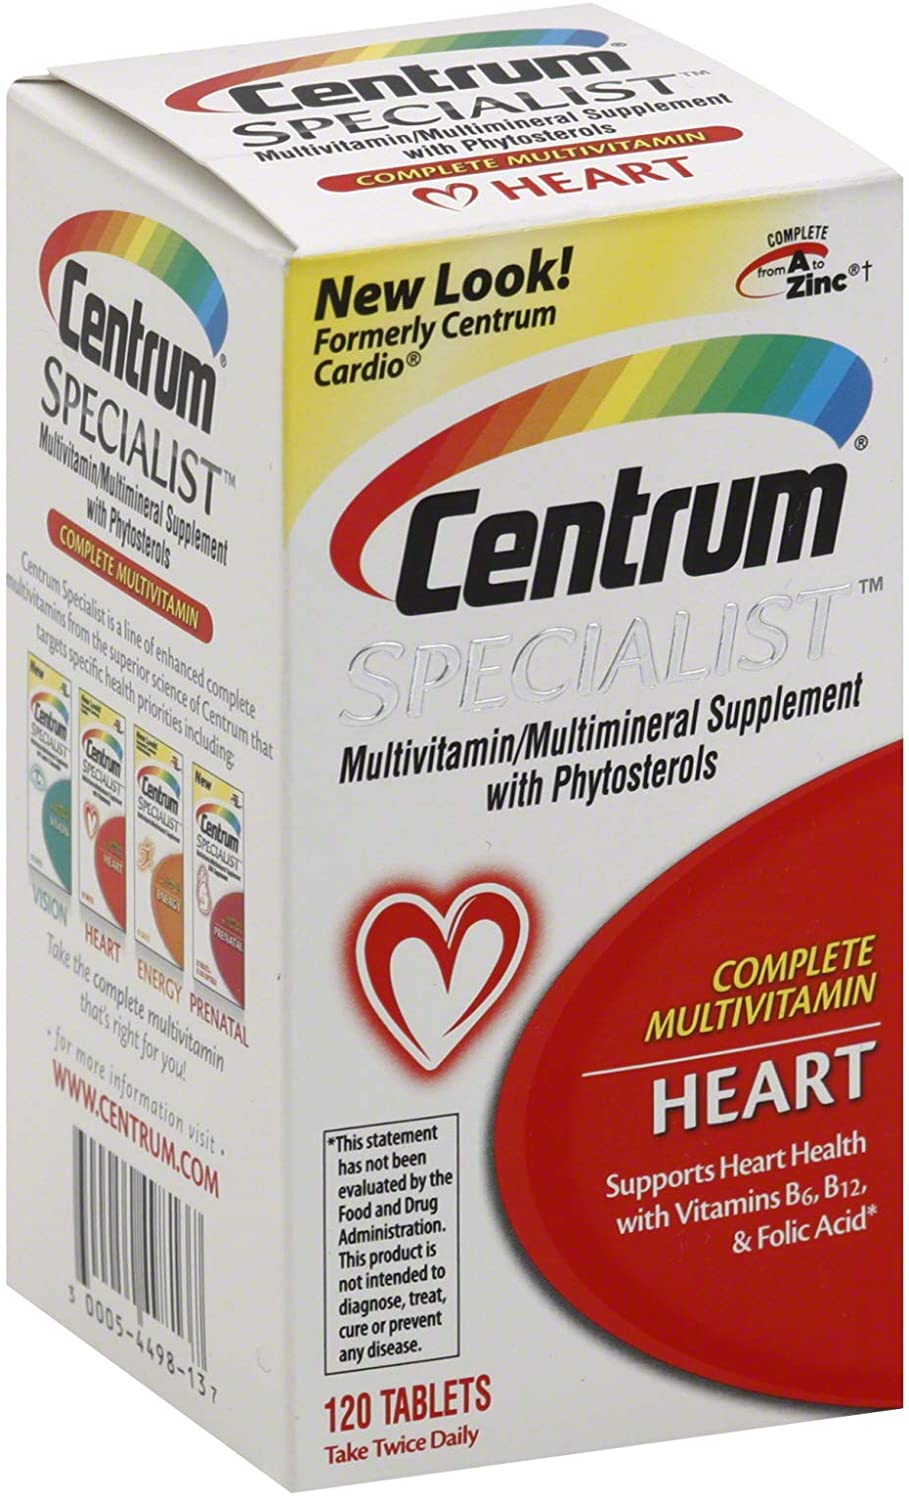 Centrum Specialist Complete Multivitamin Heart with B6/B12/Folic Acid 120 Tablets (3 Pack)